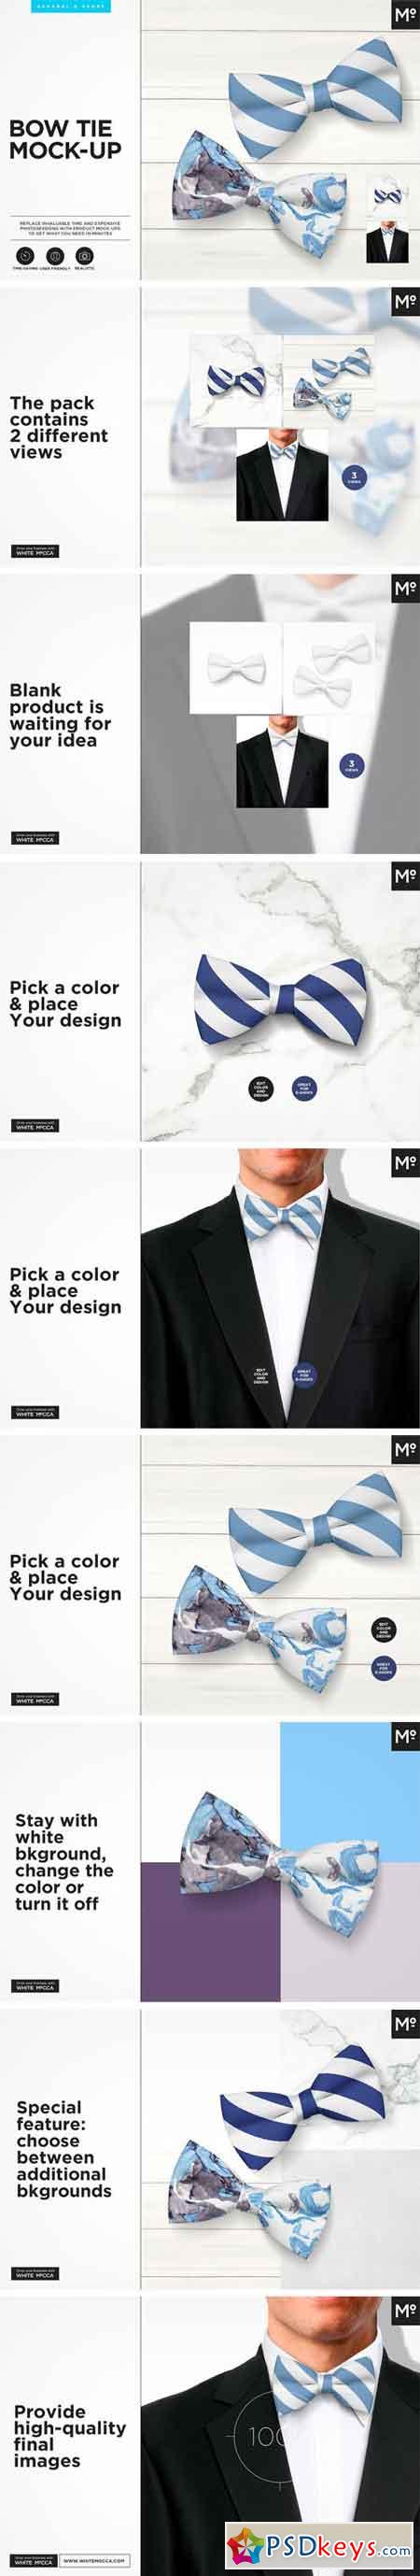 Download Bow Tie Mock-up 1866000 » Free Download Photoshop Vector ...